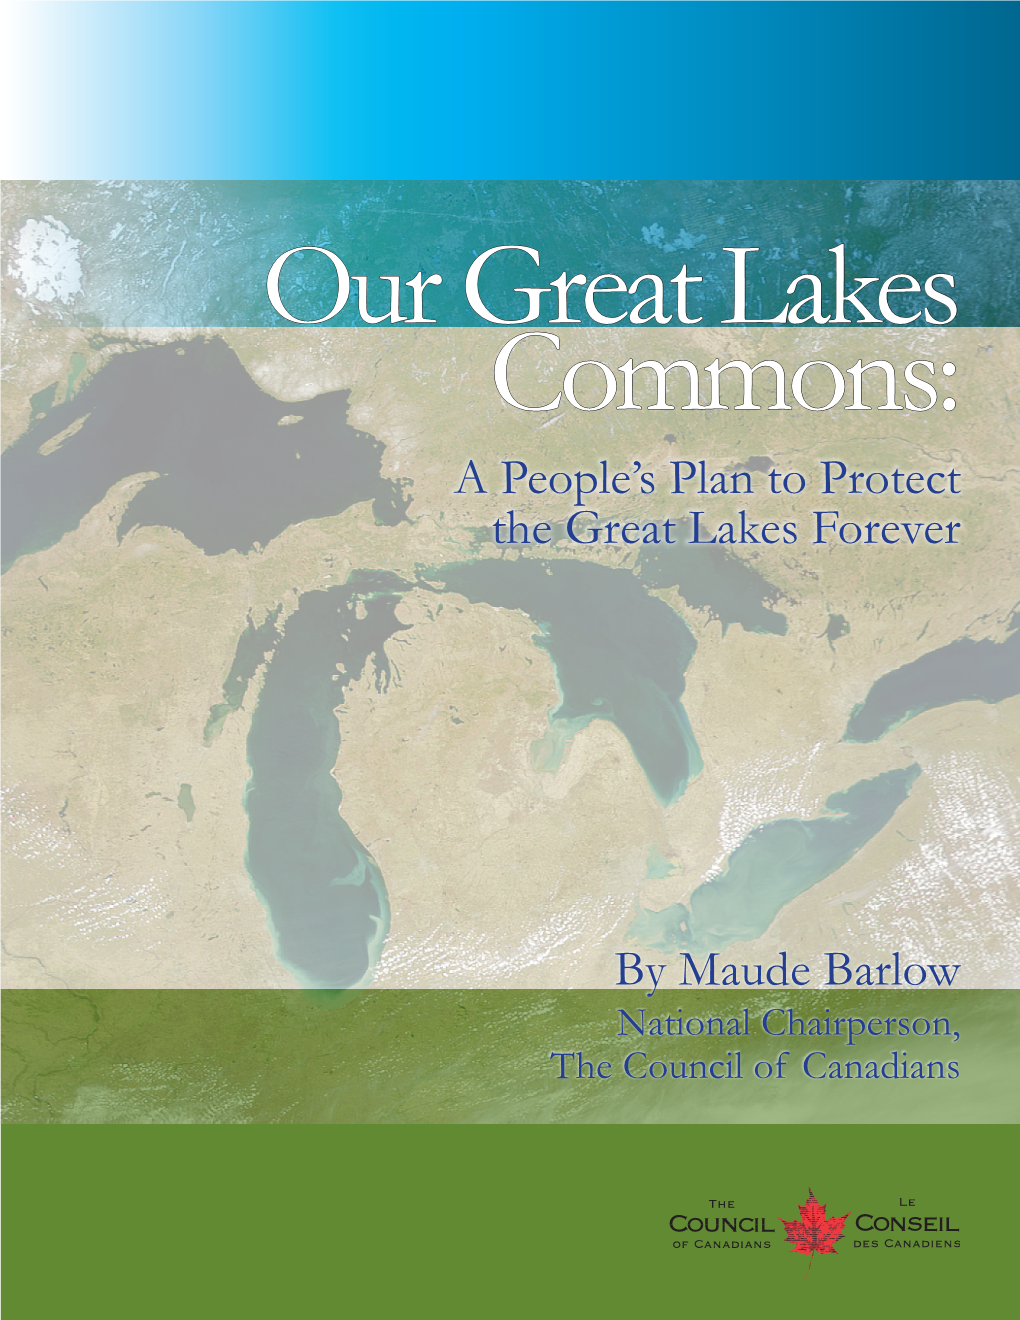 By Maude Barlow a People's Plan to Protect the Great Lakes Forever